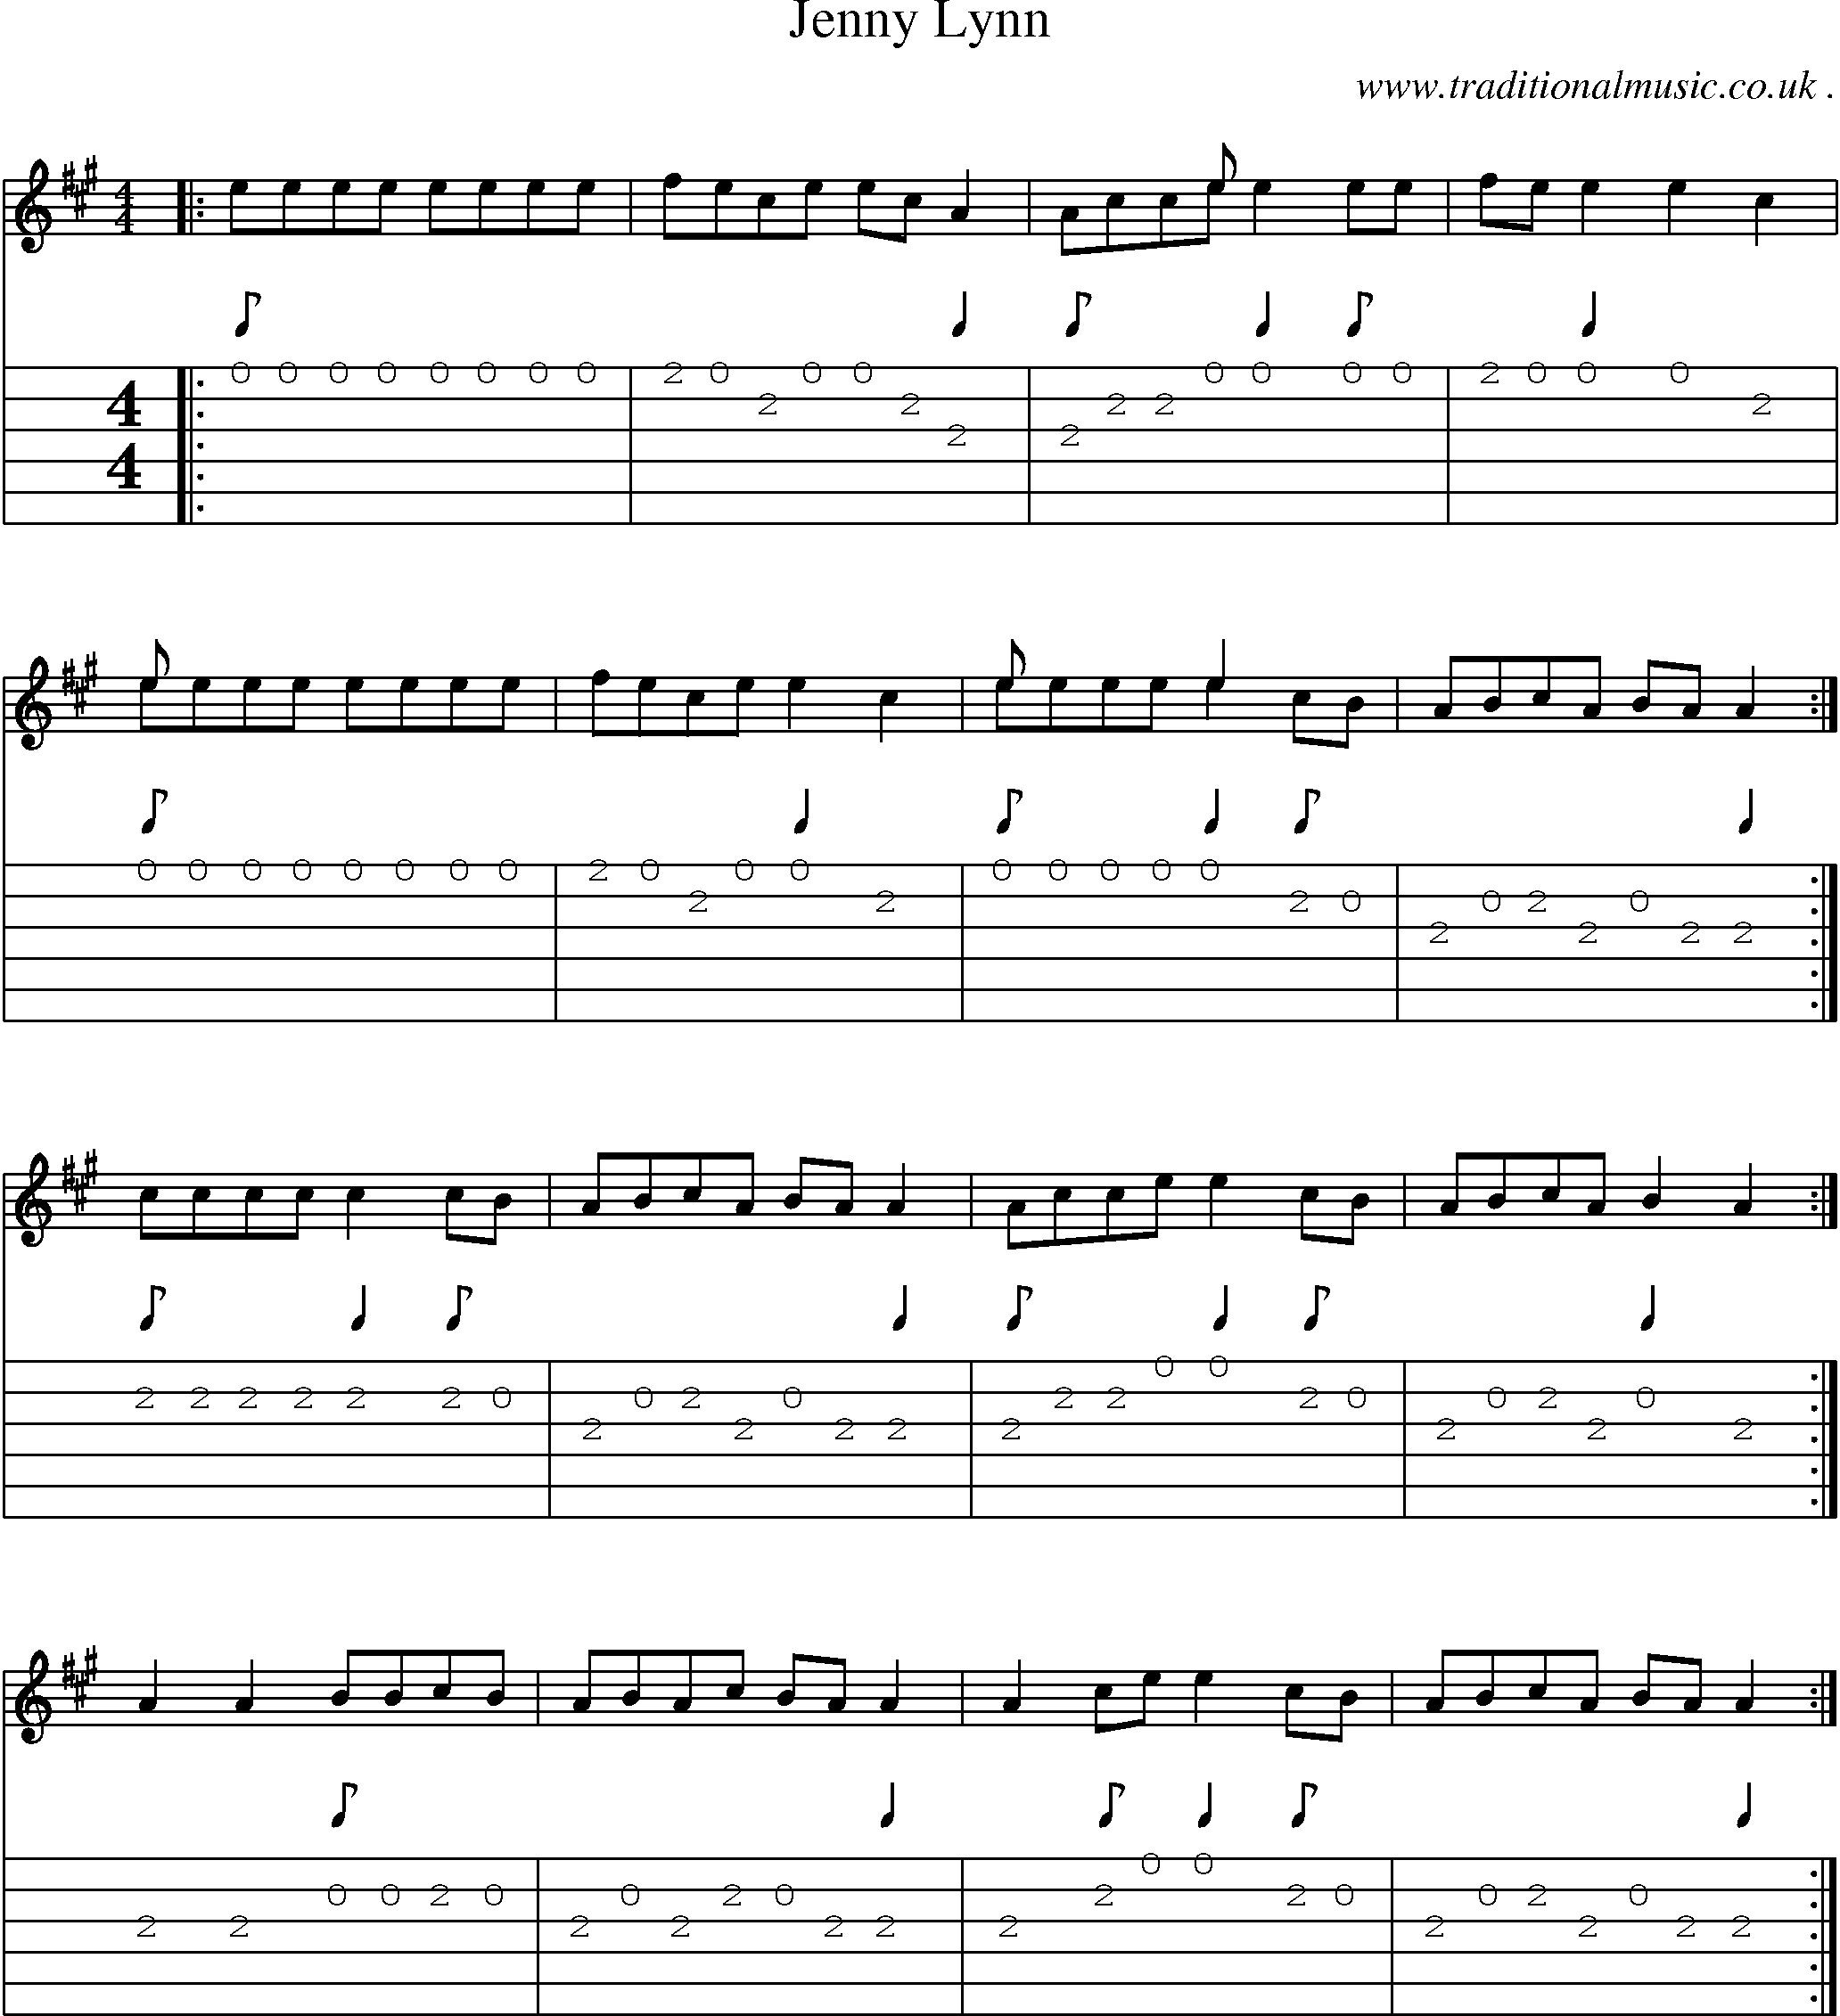 Music Score and Guitar Tabs for Jenny Lynn